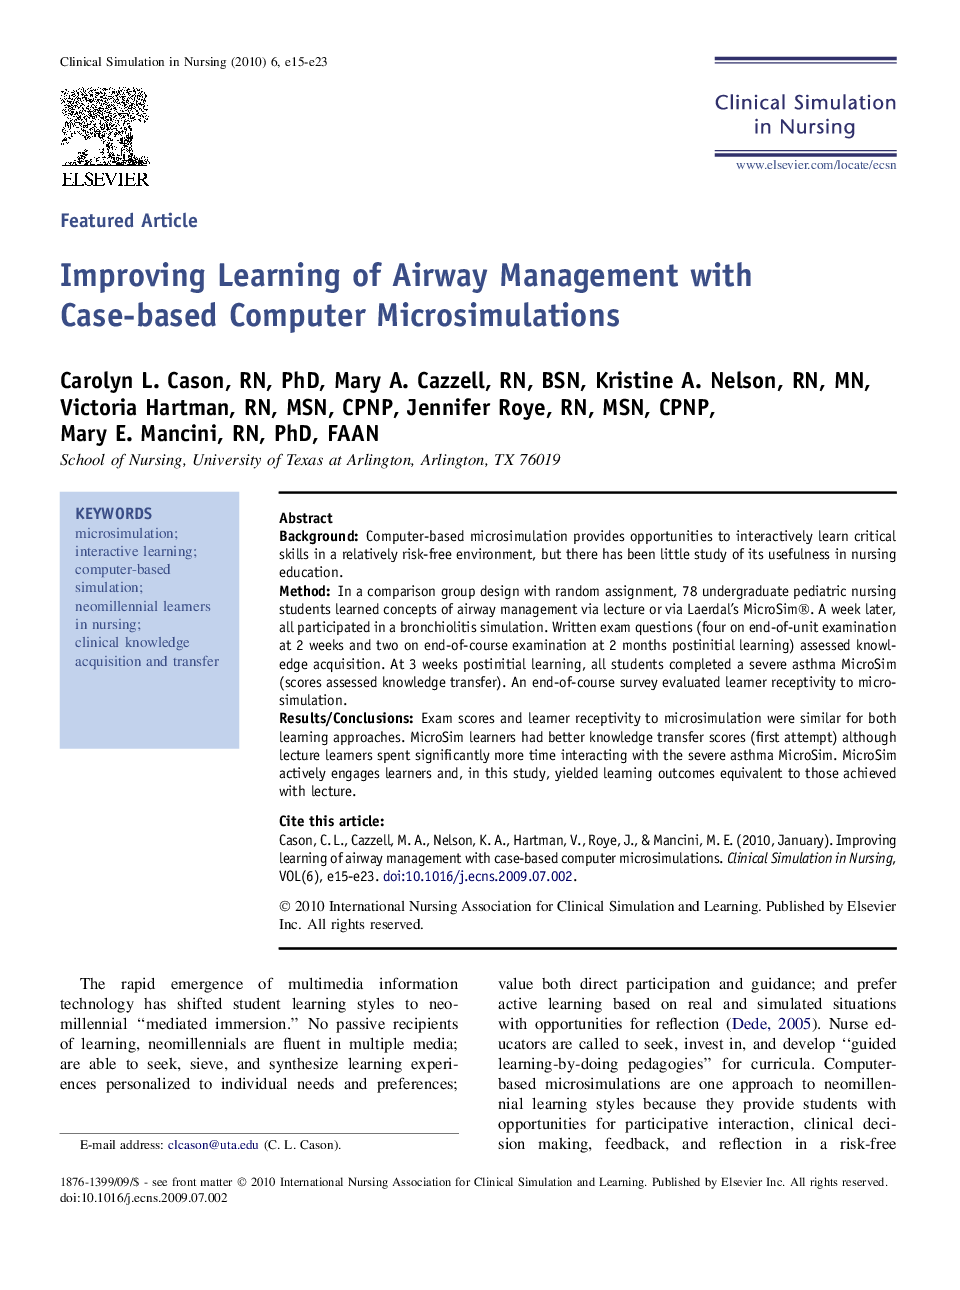 Improving Learning of Airway Management with Case-based Computer Microsimulations 